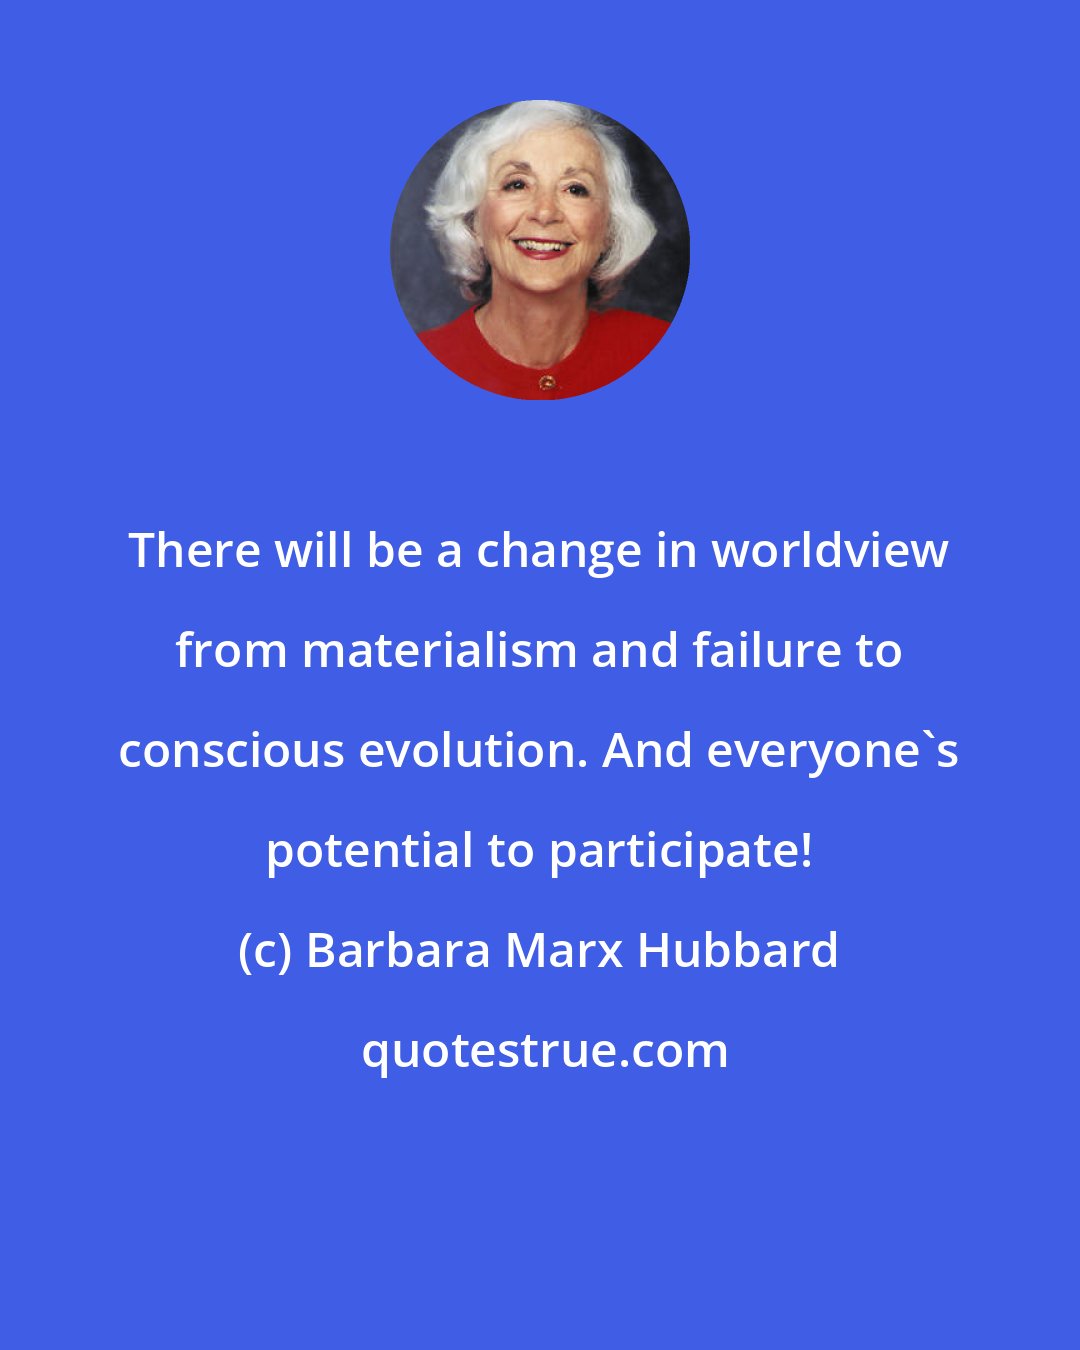 Barbara Marx Hubbard: There will be a change in worldview from materialism and failure to conscious evolution. And everyone's potential to participate!